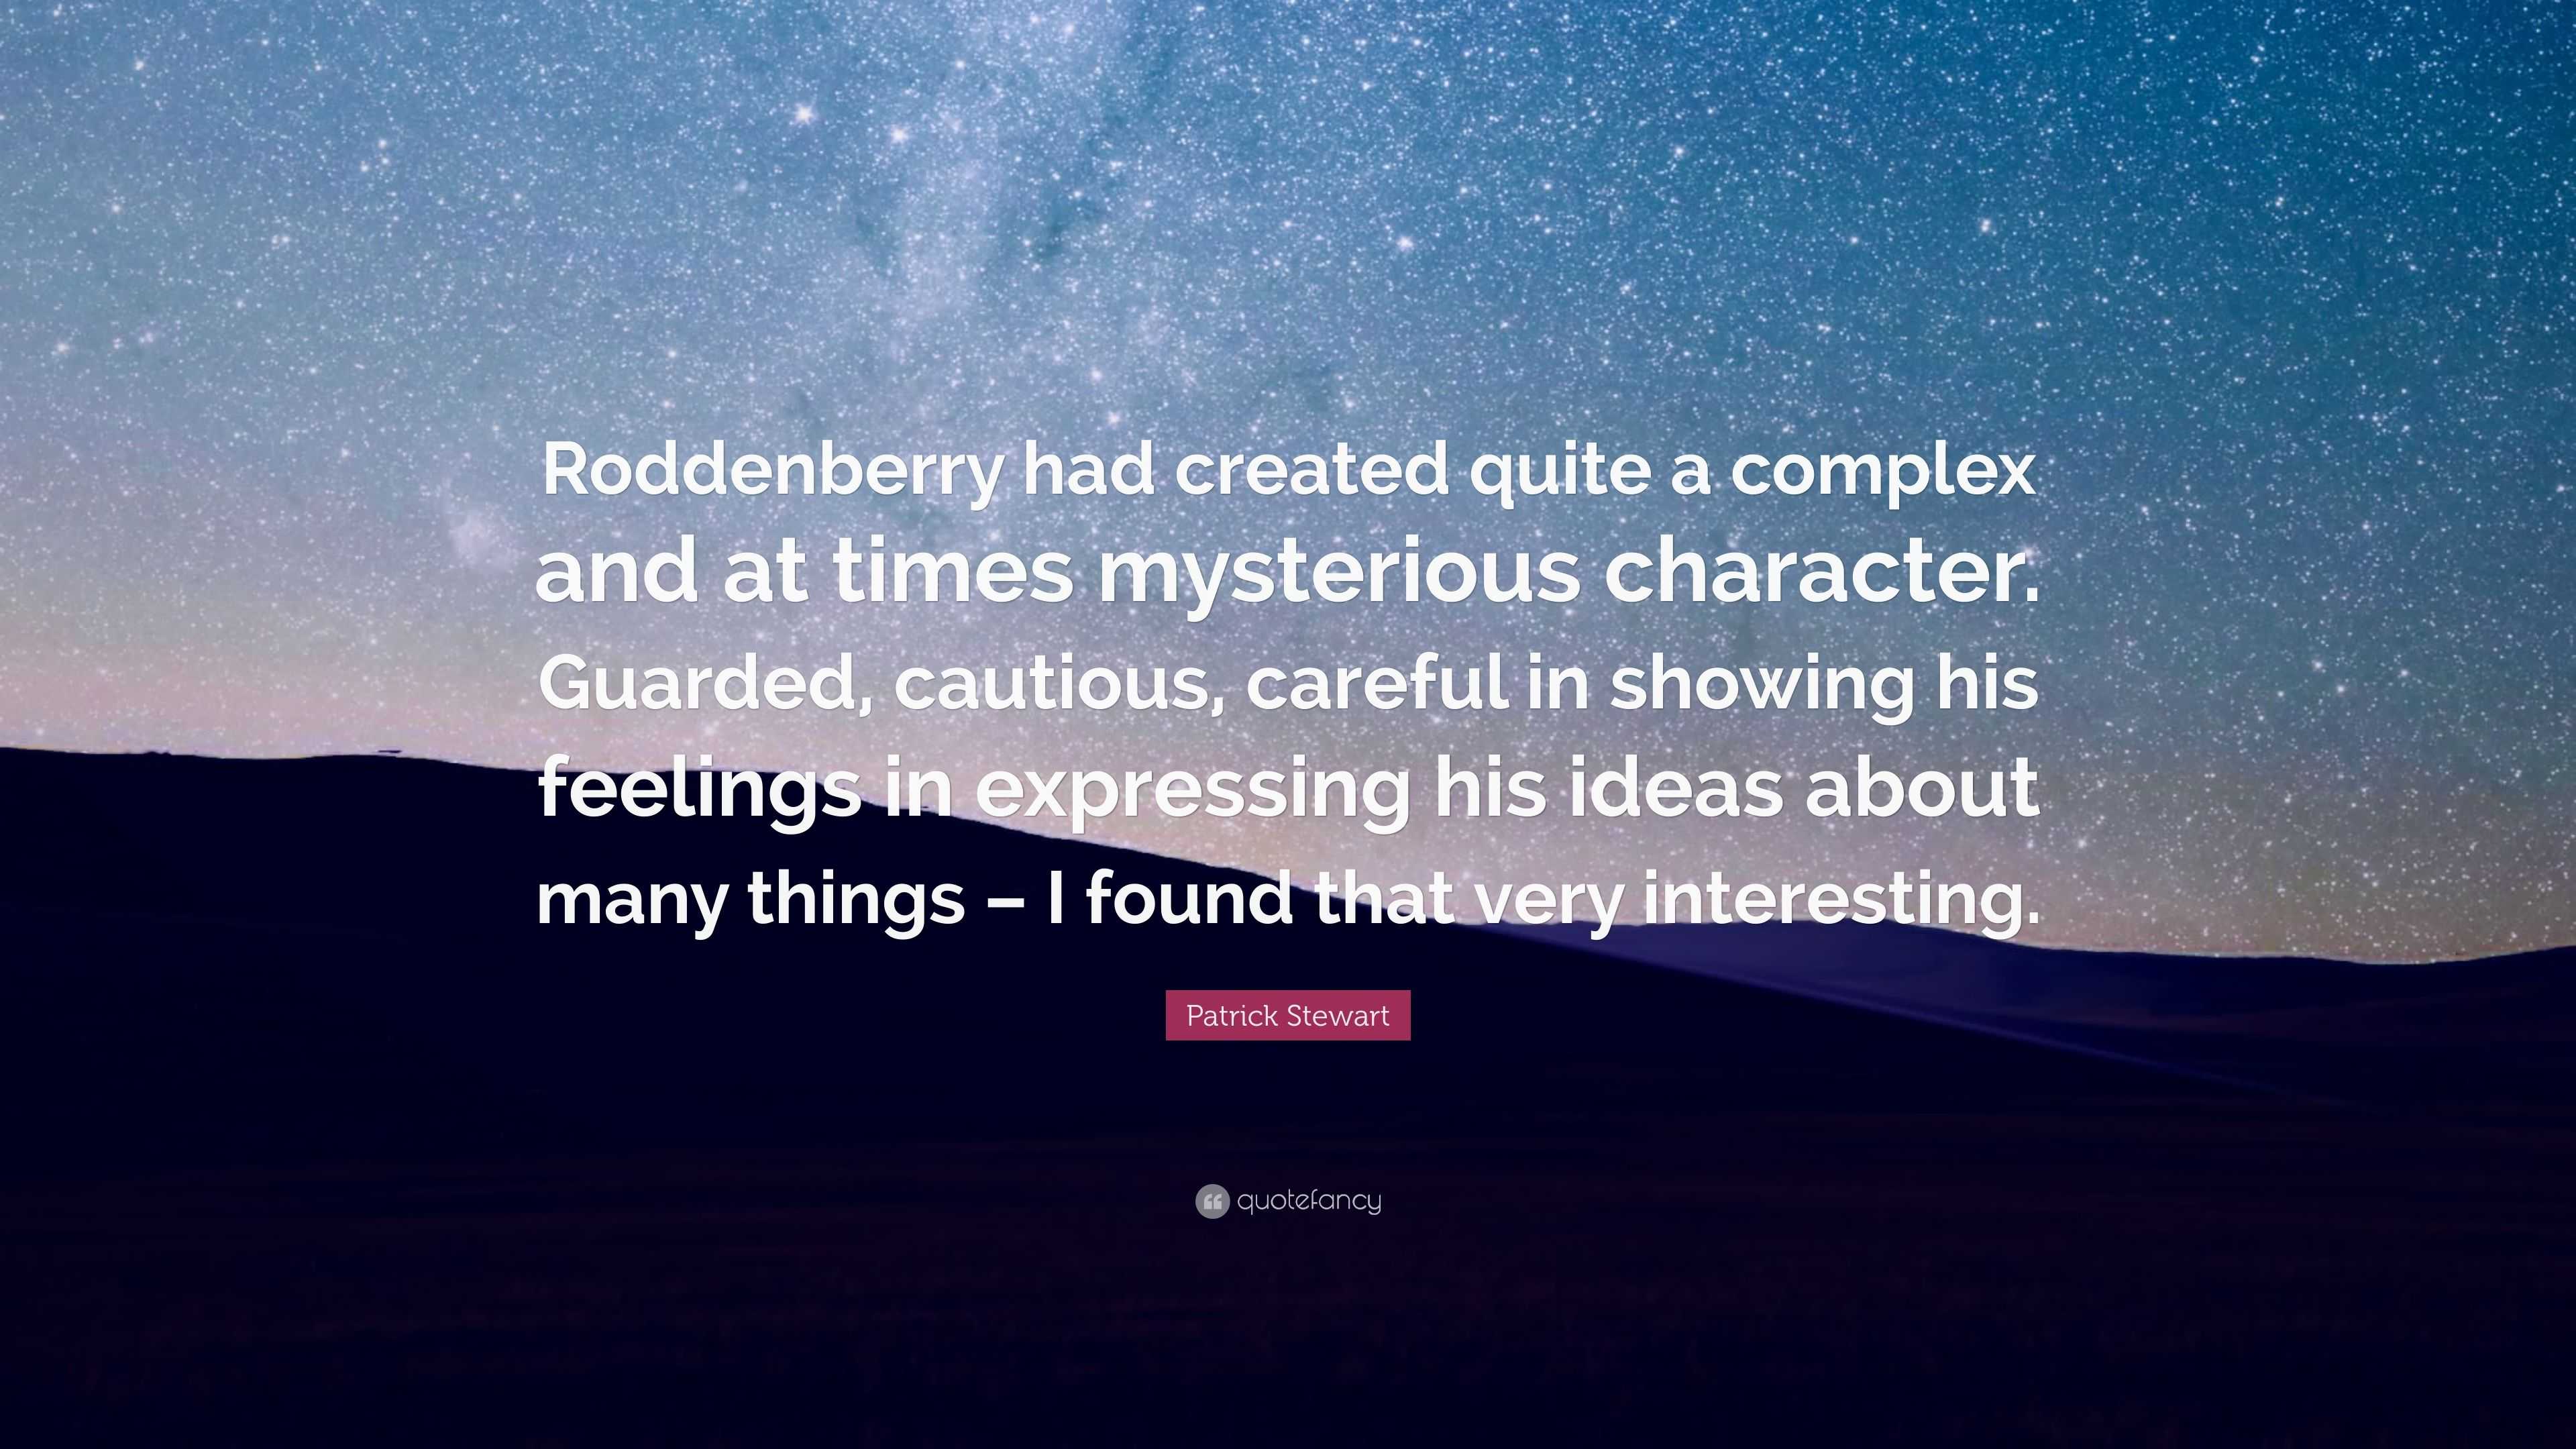 🅡🅞🅓🅓🅔🅝🅑🅔🅡🅡🅨 on Instagram: The Roddenberry Daily Quote